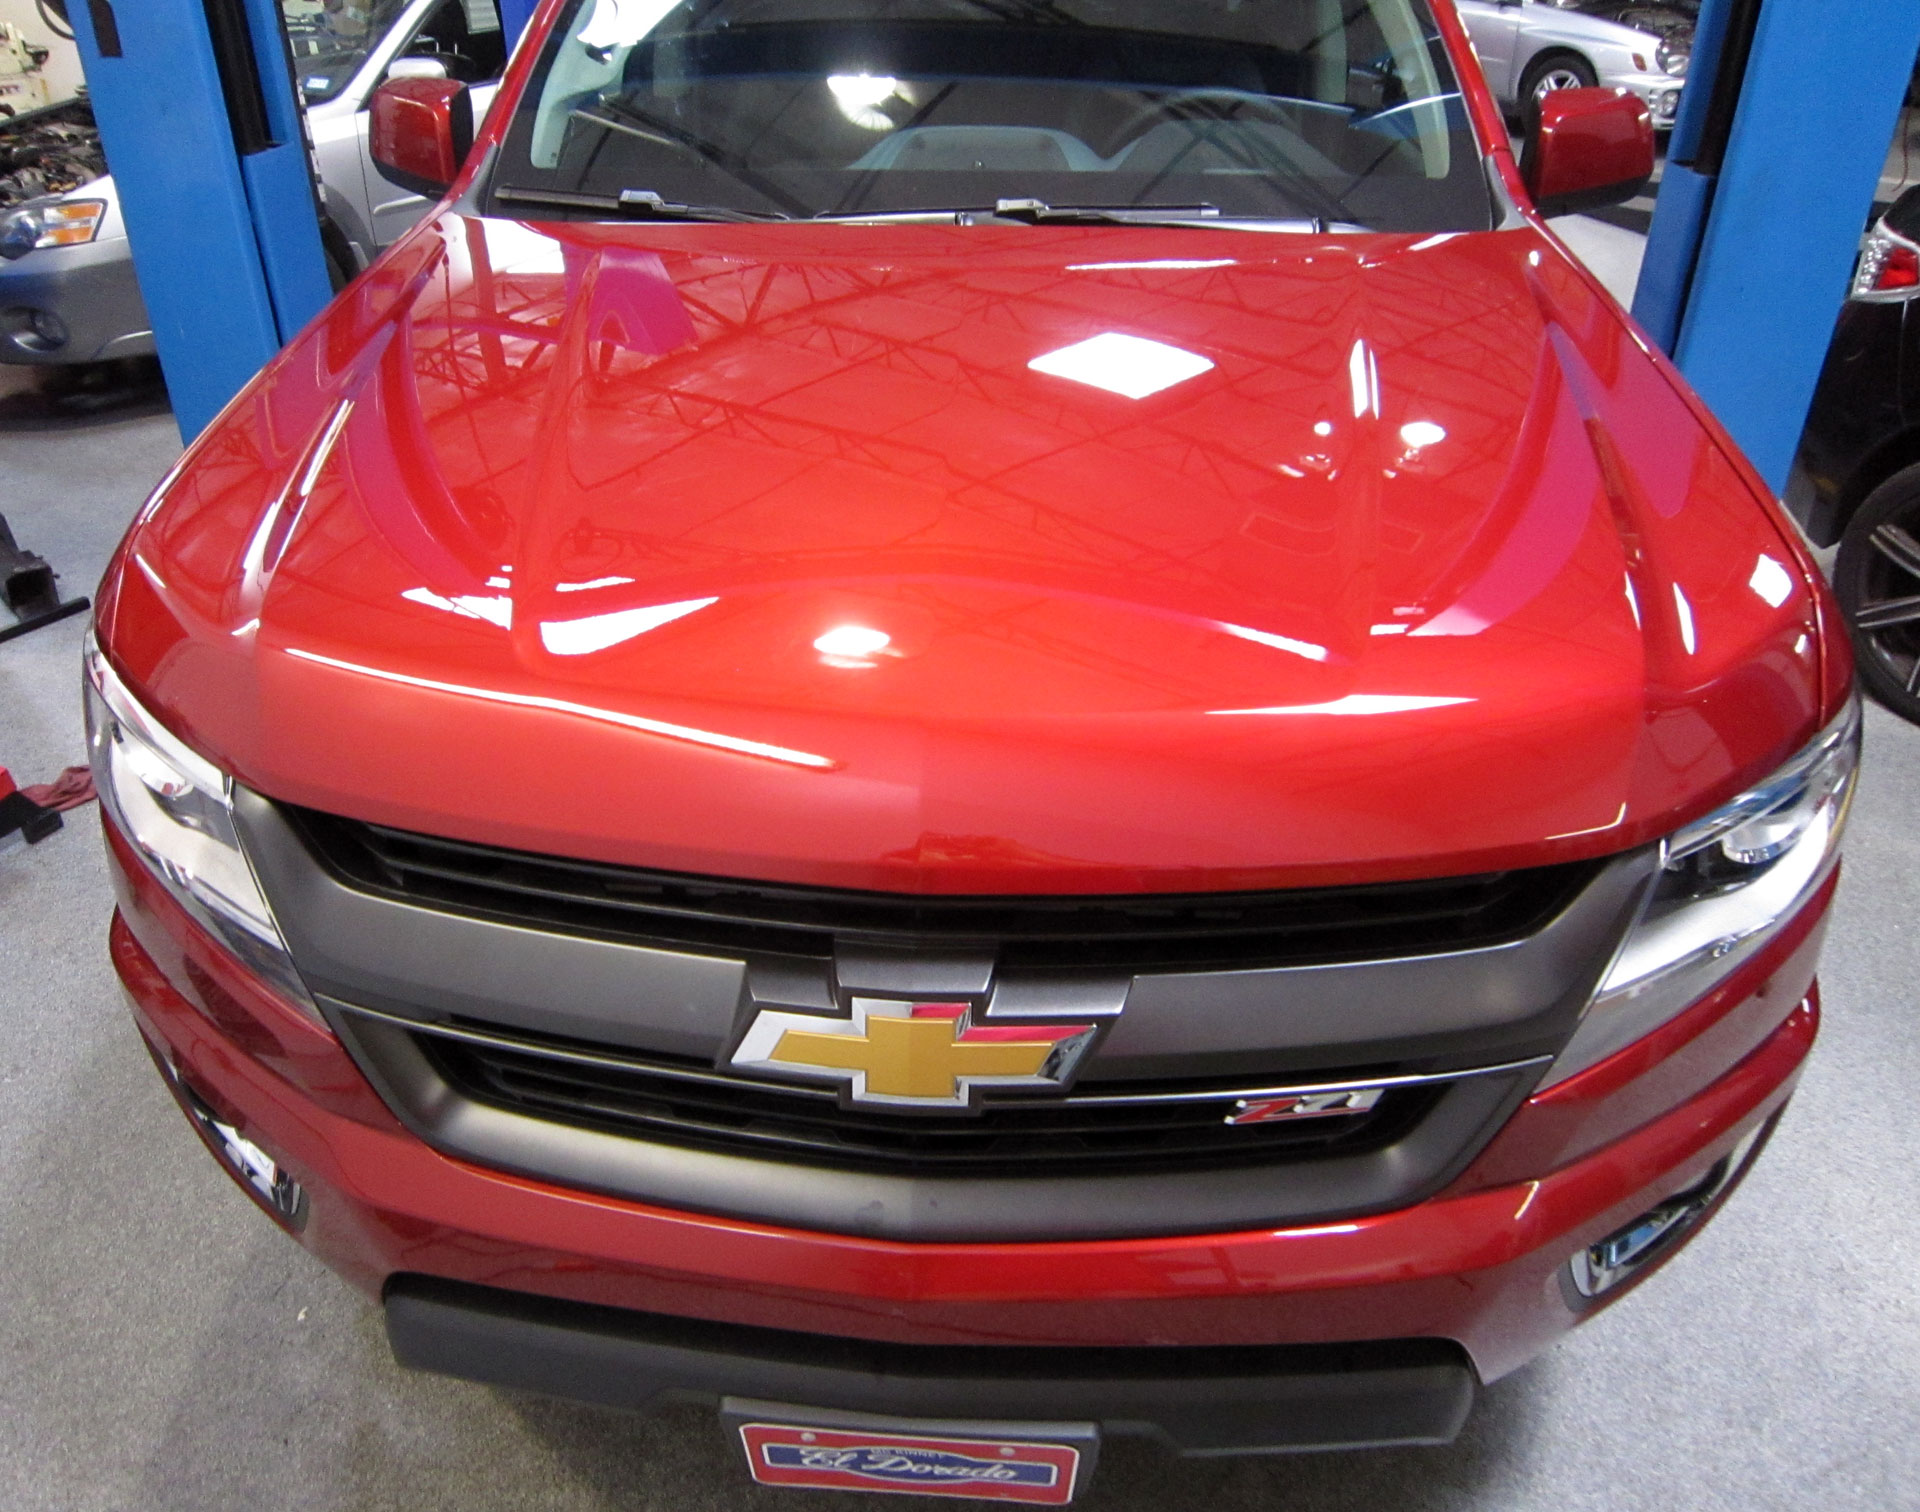 Chevrolet Colorado protected with 3M Pro Series Clear Bra Paint Protection Film